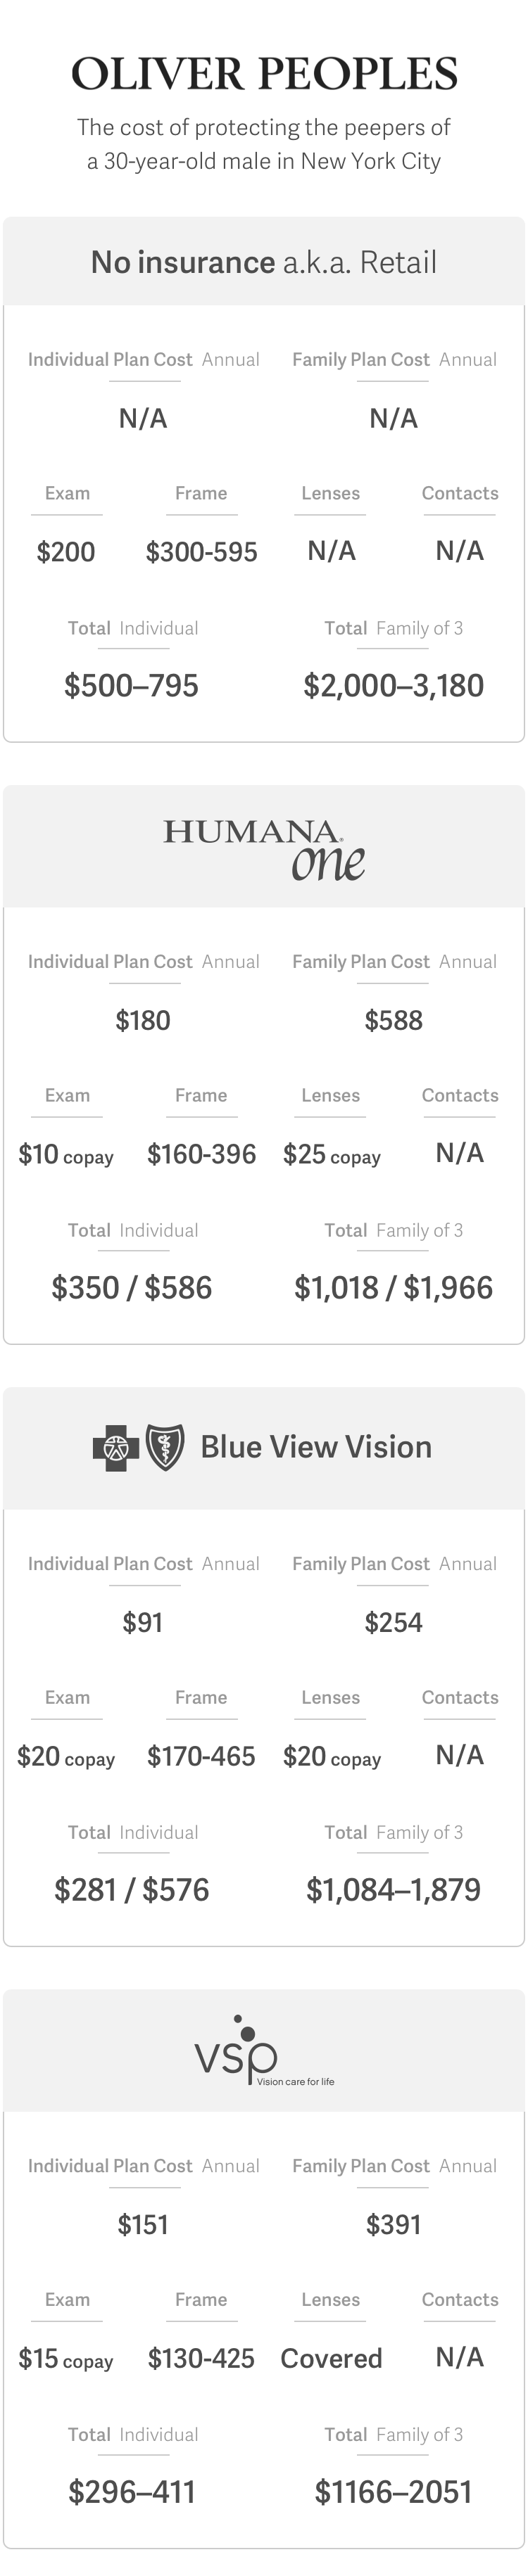 Is vision insurance worth it?